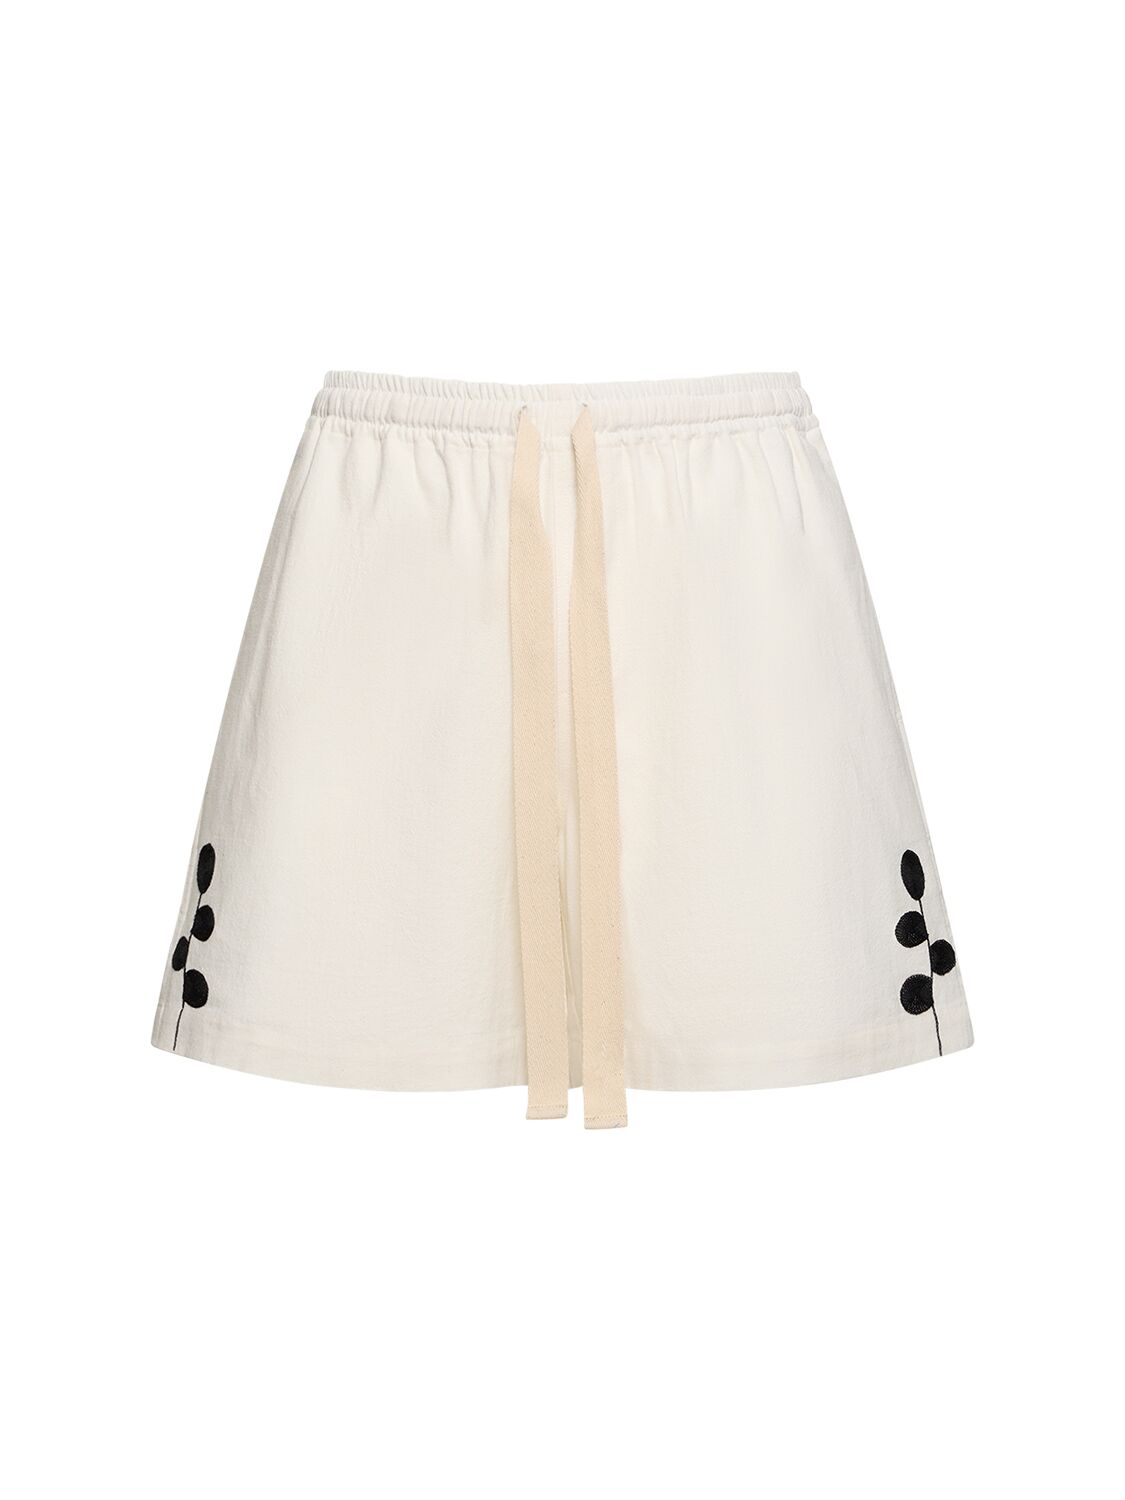 COMMAS Embroidered Ramie & Cotton Shorts